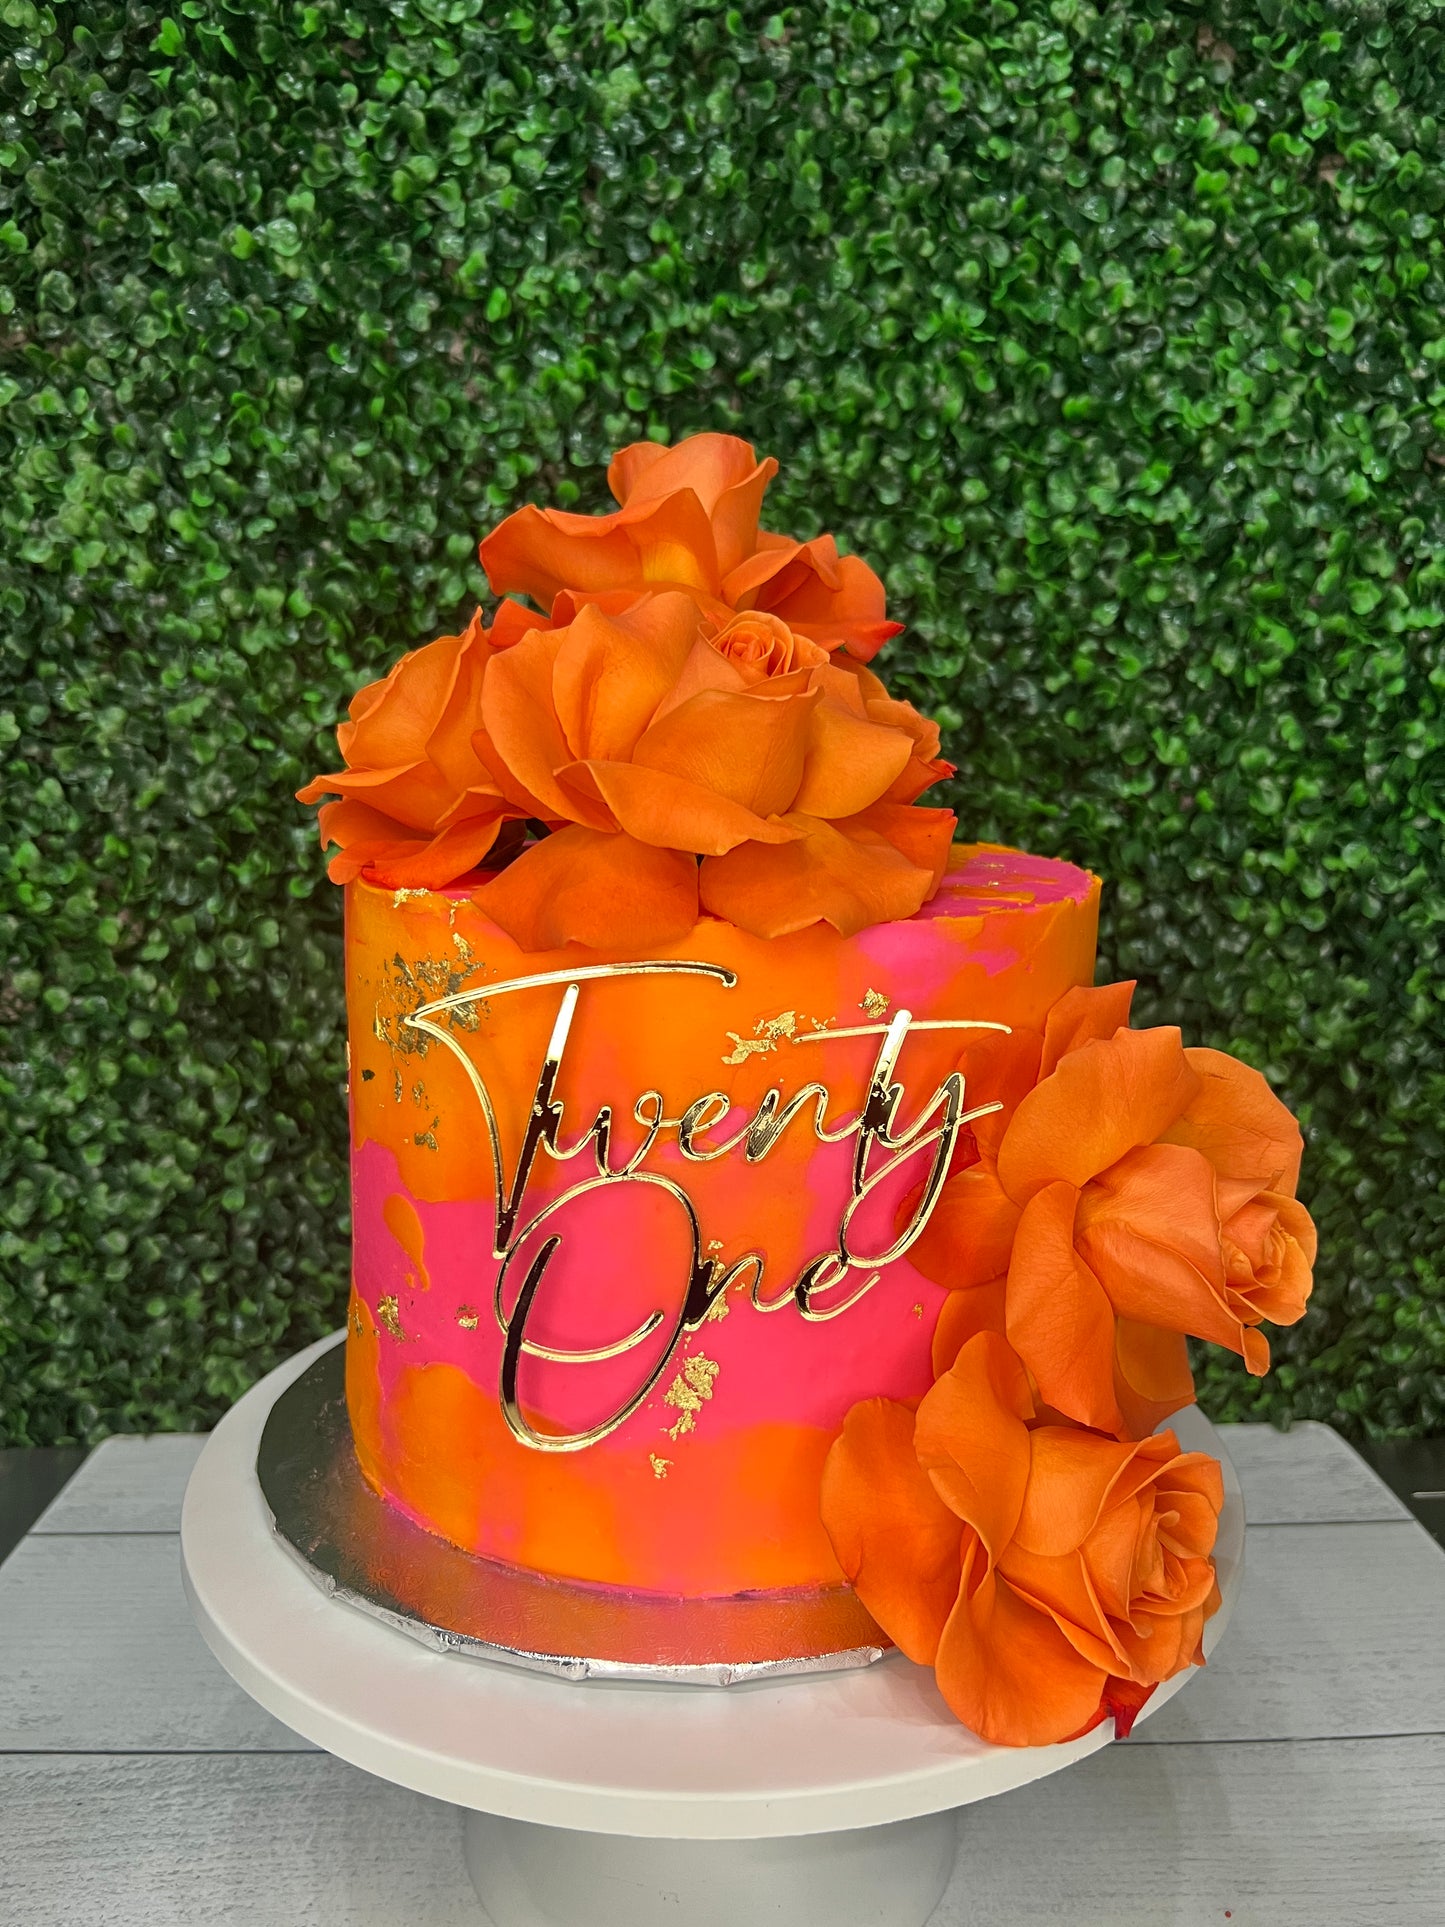 Live florals (cake add-on)